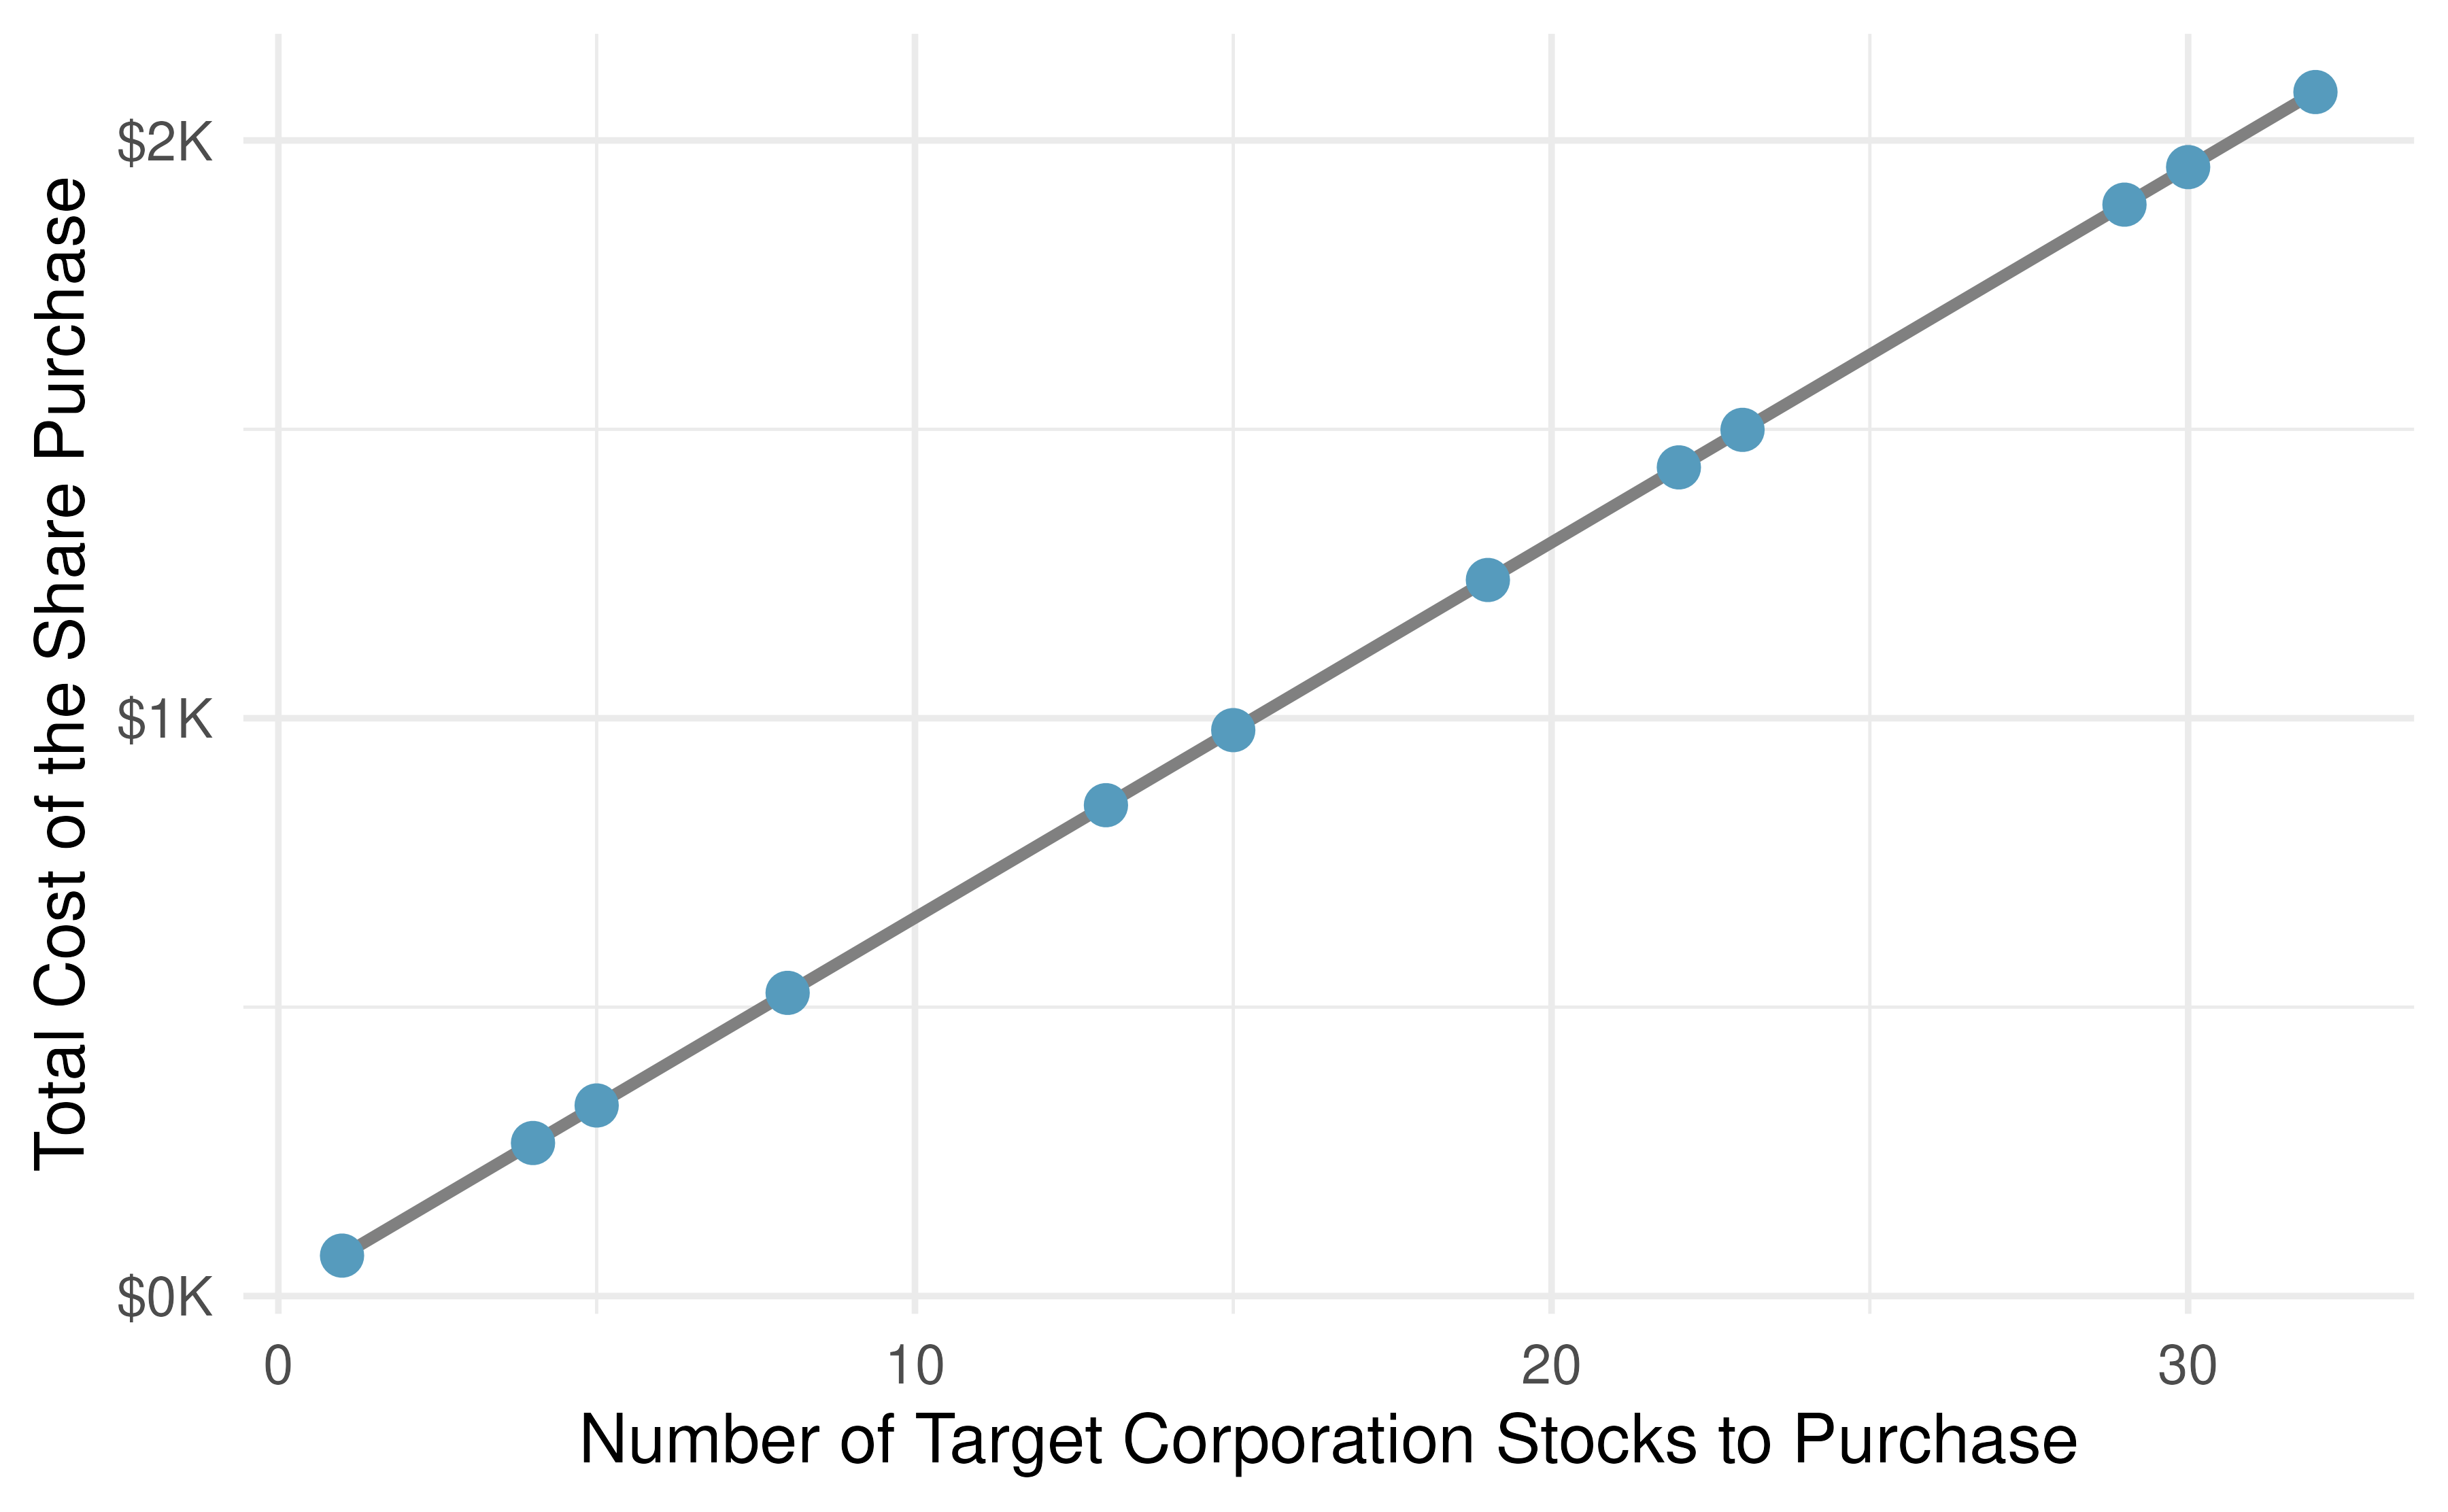 Requests from twelve separate buyers were simultaneously placed with a trading company to purchase Target Corporation stock (ticker TGT, December 28th, 2018), and the total cost of the shares were reported. Because the cost is computed using a linear formula, the linear fit is perfect.